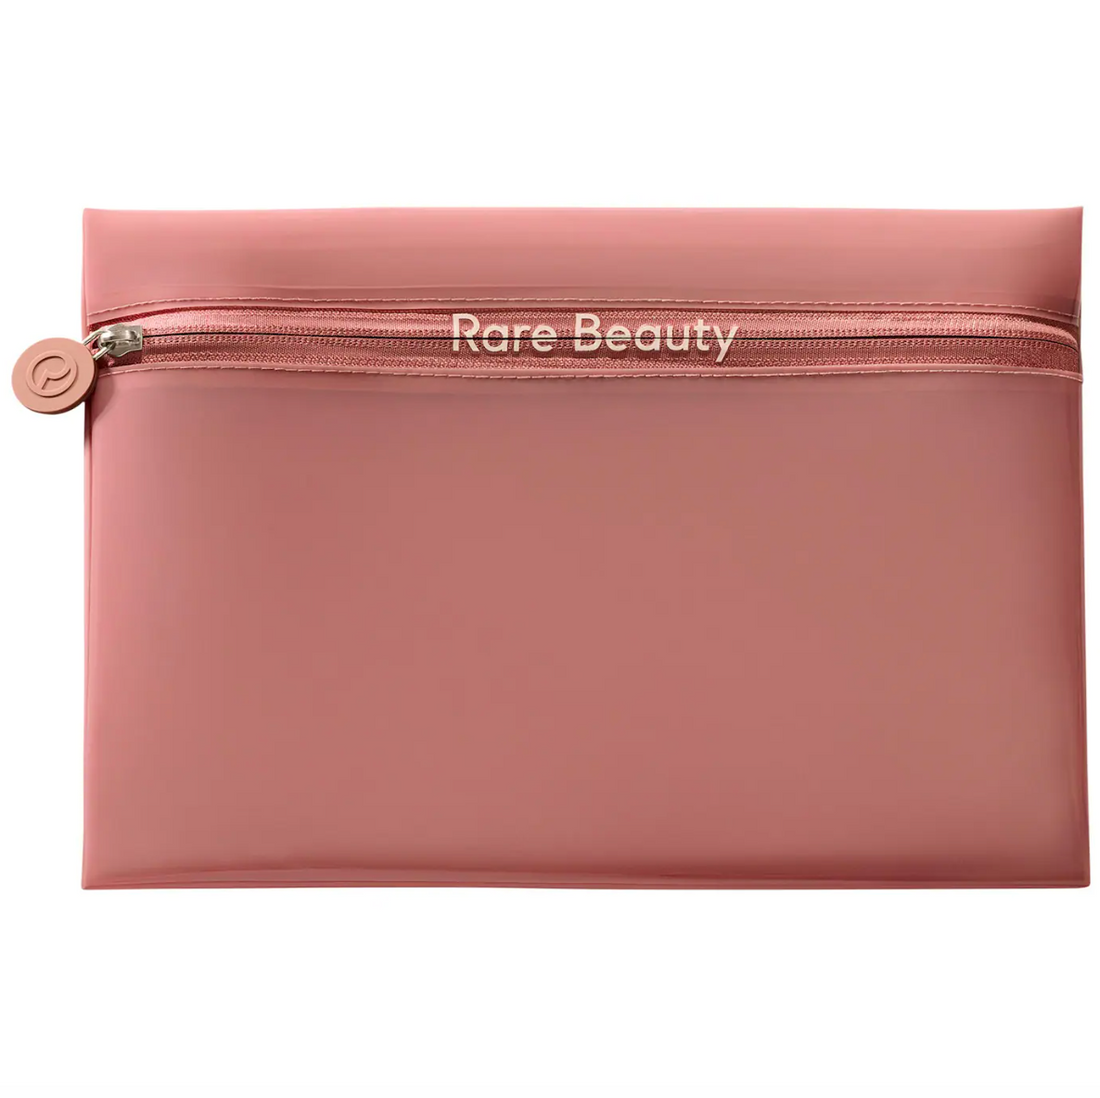 Find Comfort Tinted Clutch - Rare Beauty by Selena Gomez.